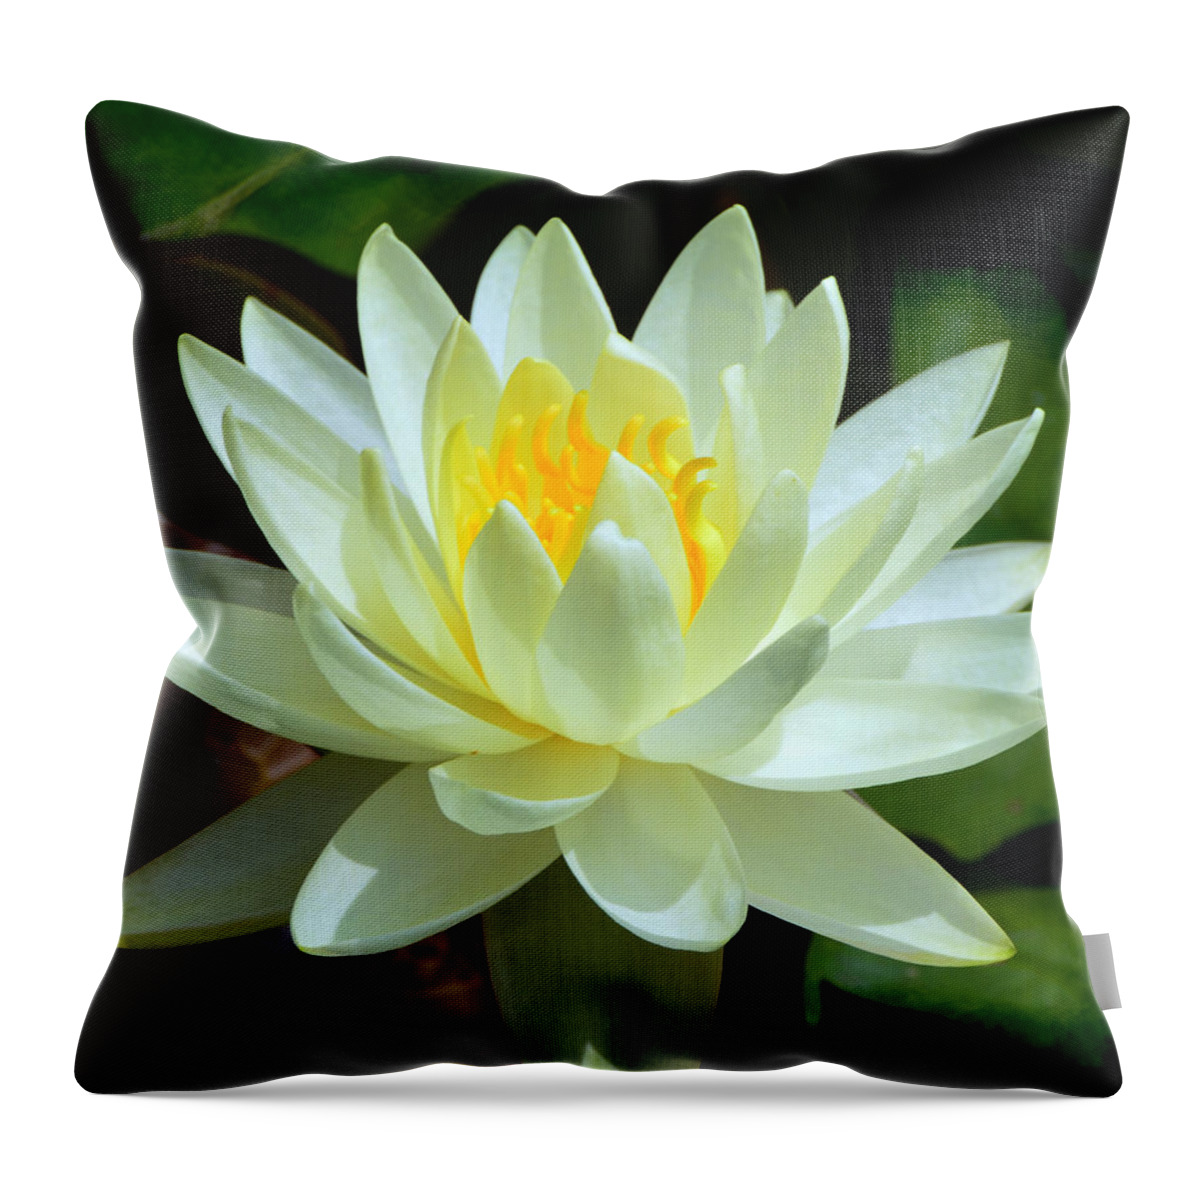 Water Throw Pillow featuring the photograph Single Yellow Water Lily by Kathleen Stephens